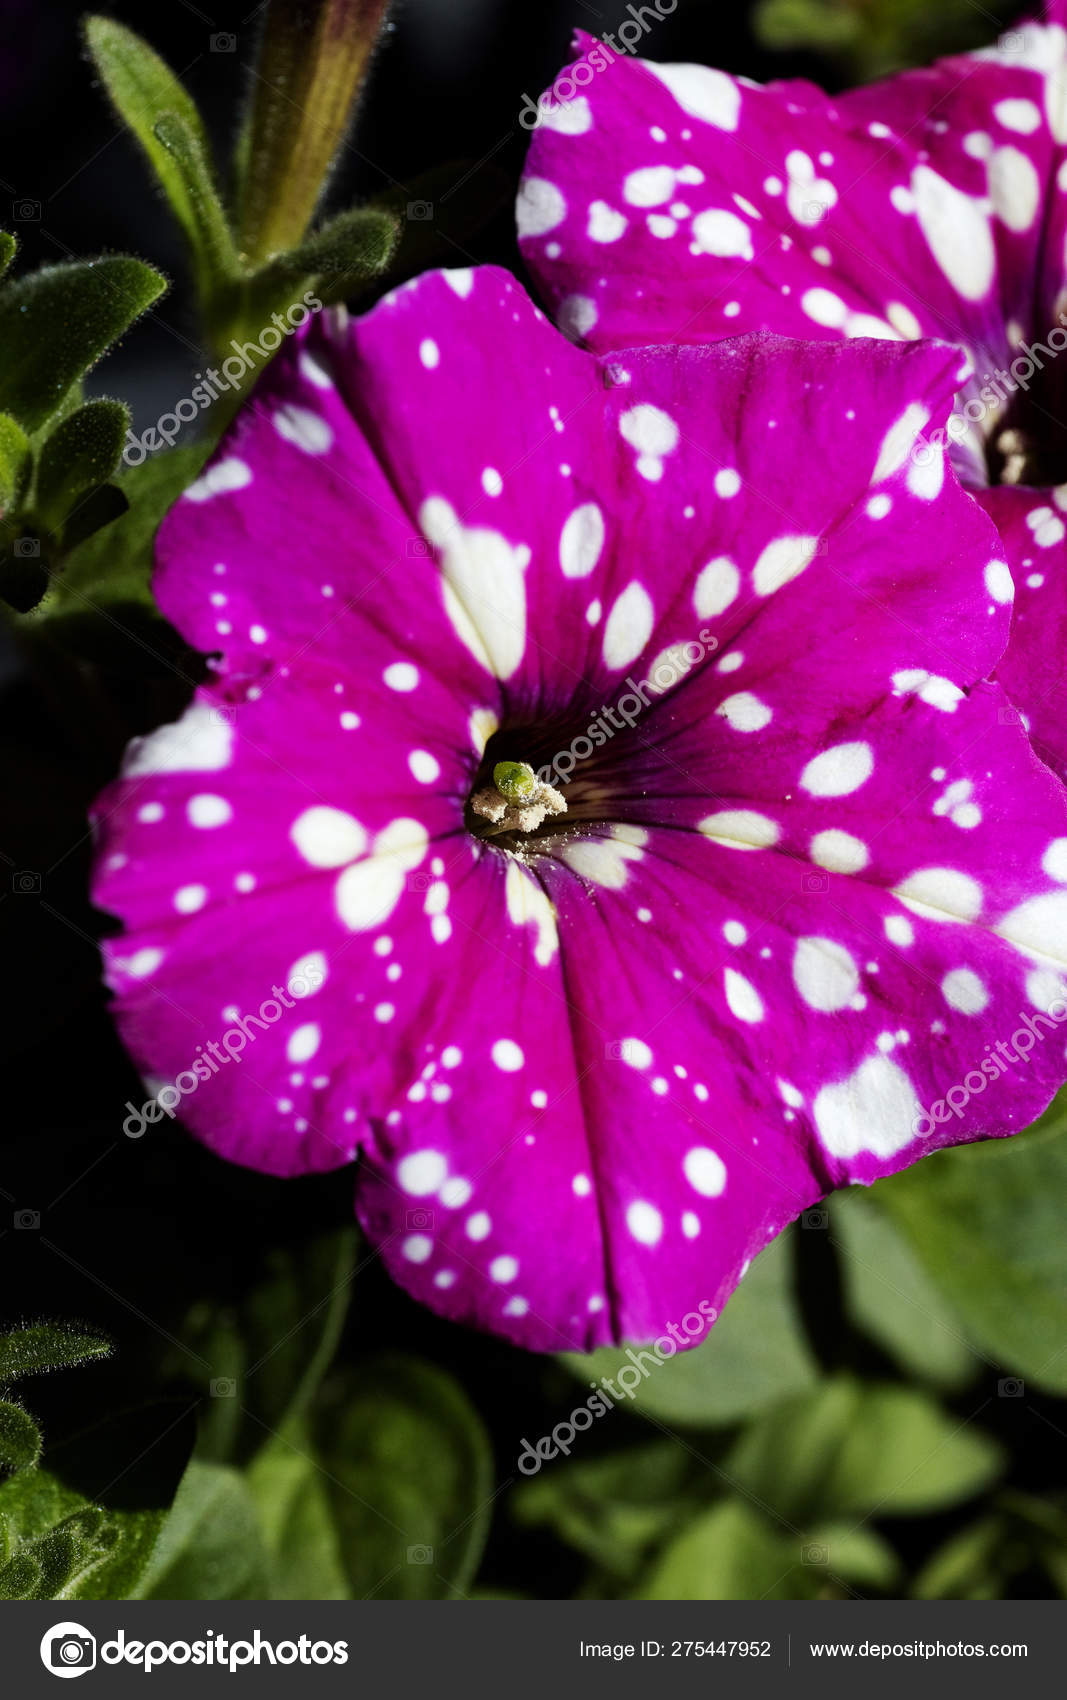 Petunia Axillaris Purple Flower With White Wild Flower Background Fine Art In High Quality Prints Products Stock Photo C Bakalaerozzphotography Yahoo Com 275447952